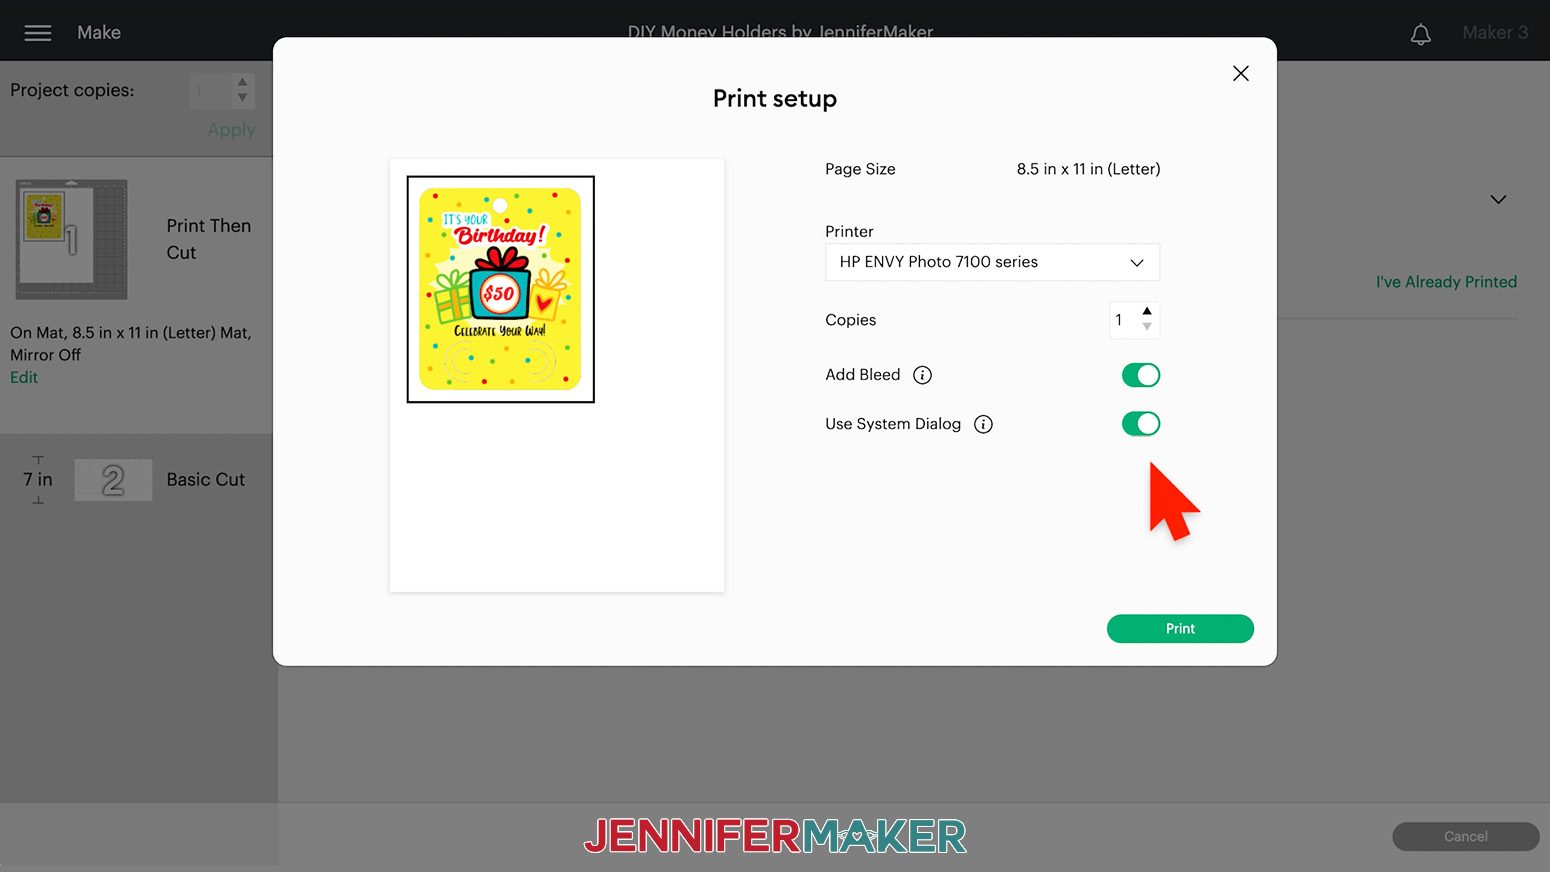 Print setup screen in Cricut Design Space showing the birthday design for the DIY money holders project. Add Bleed and Use System Dialog sliders are both green.